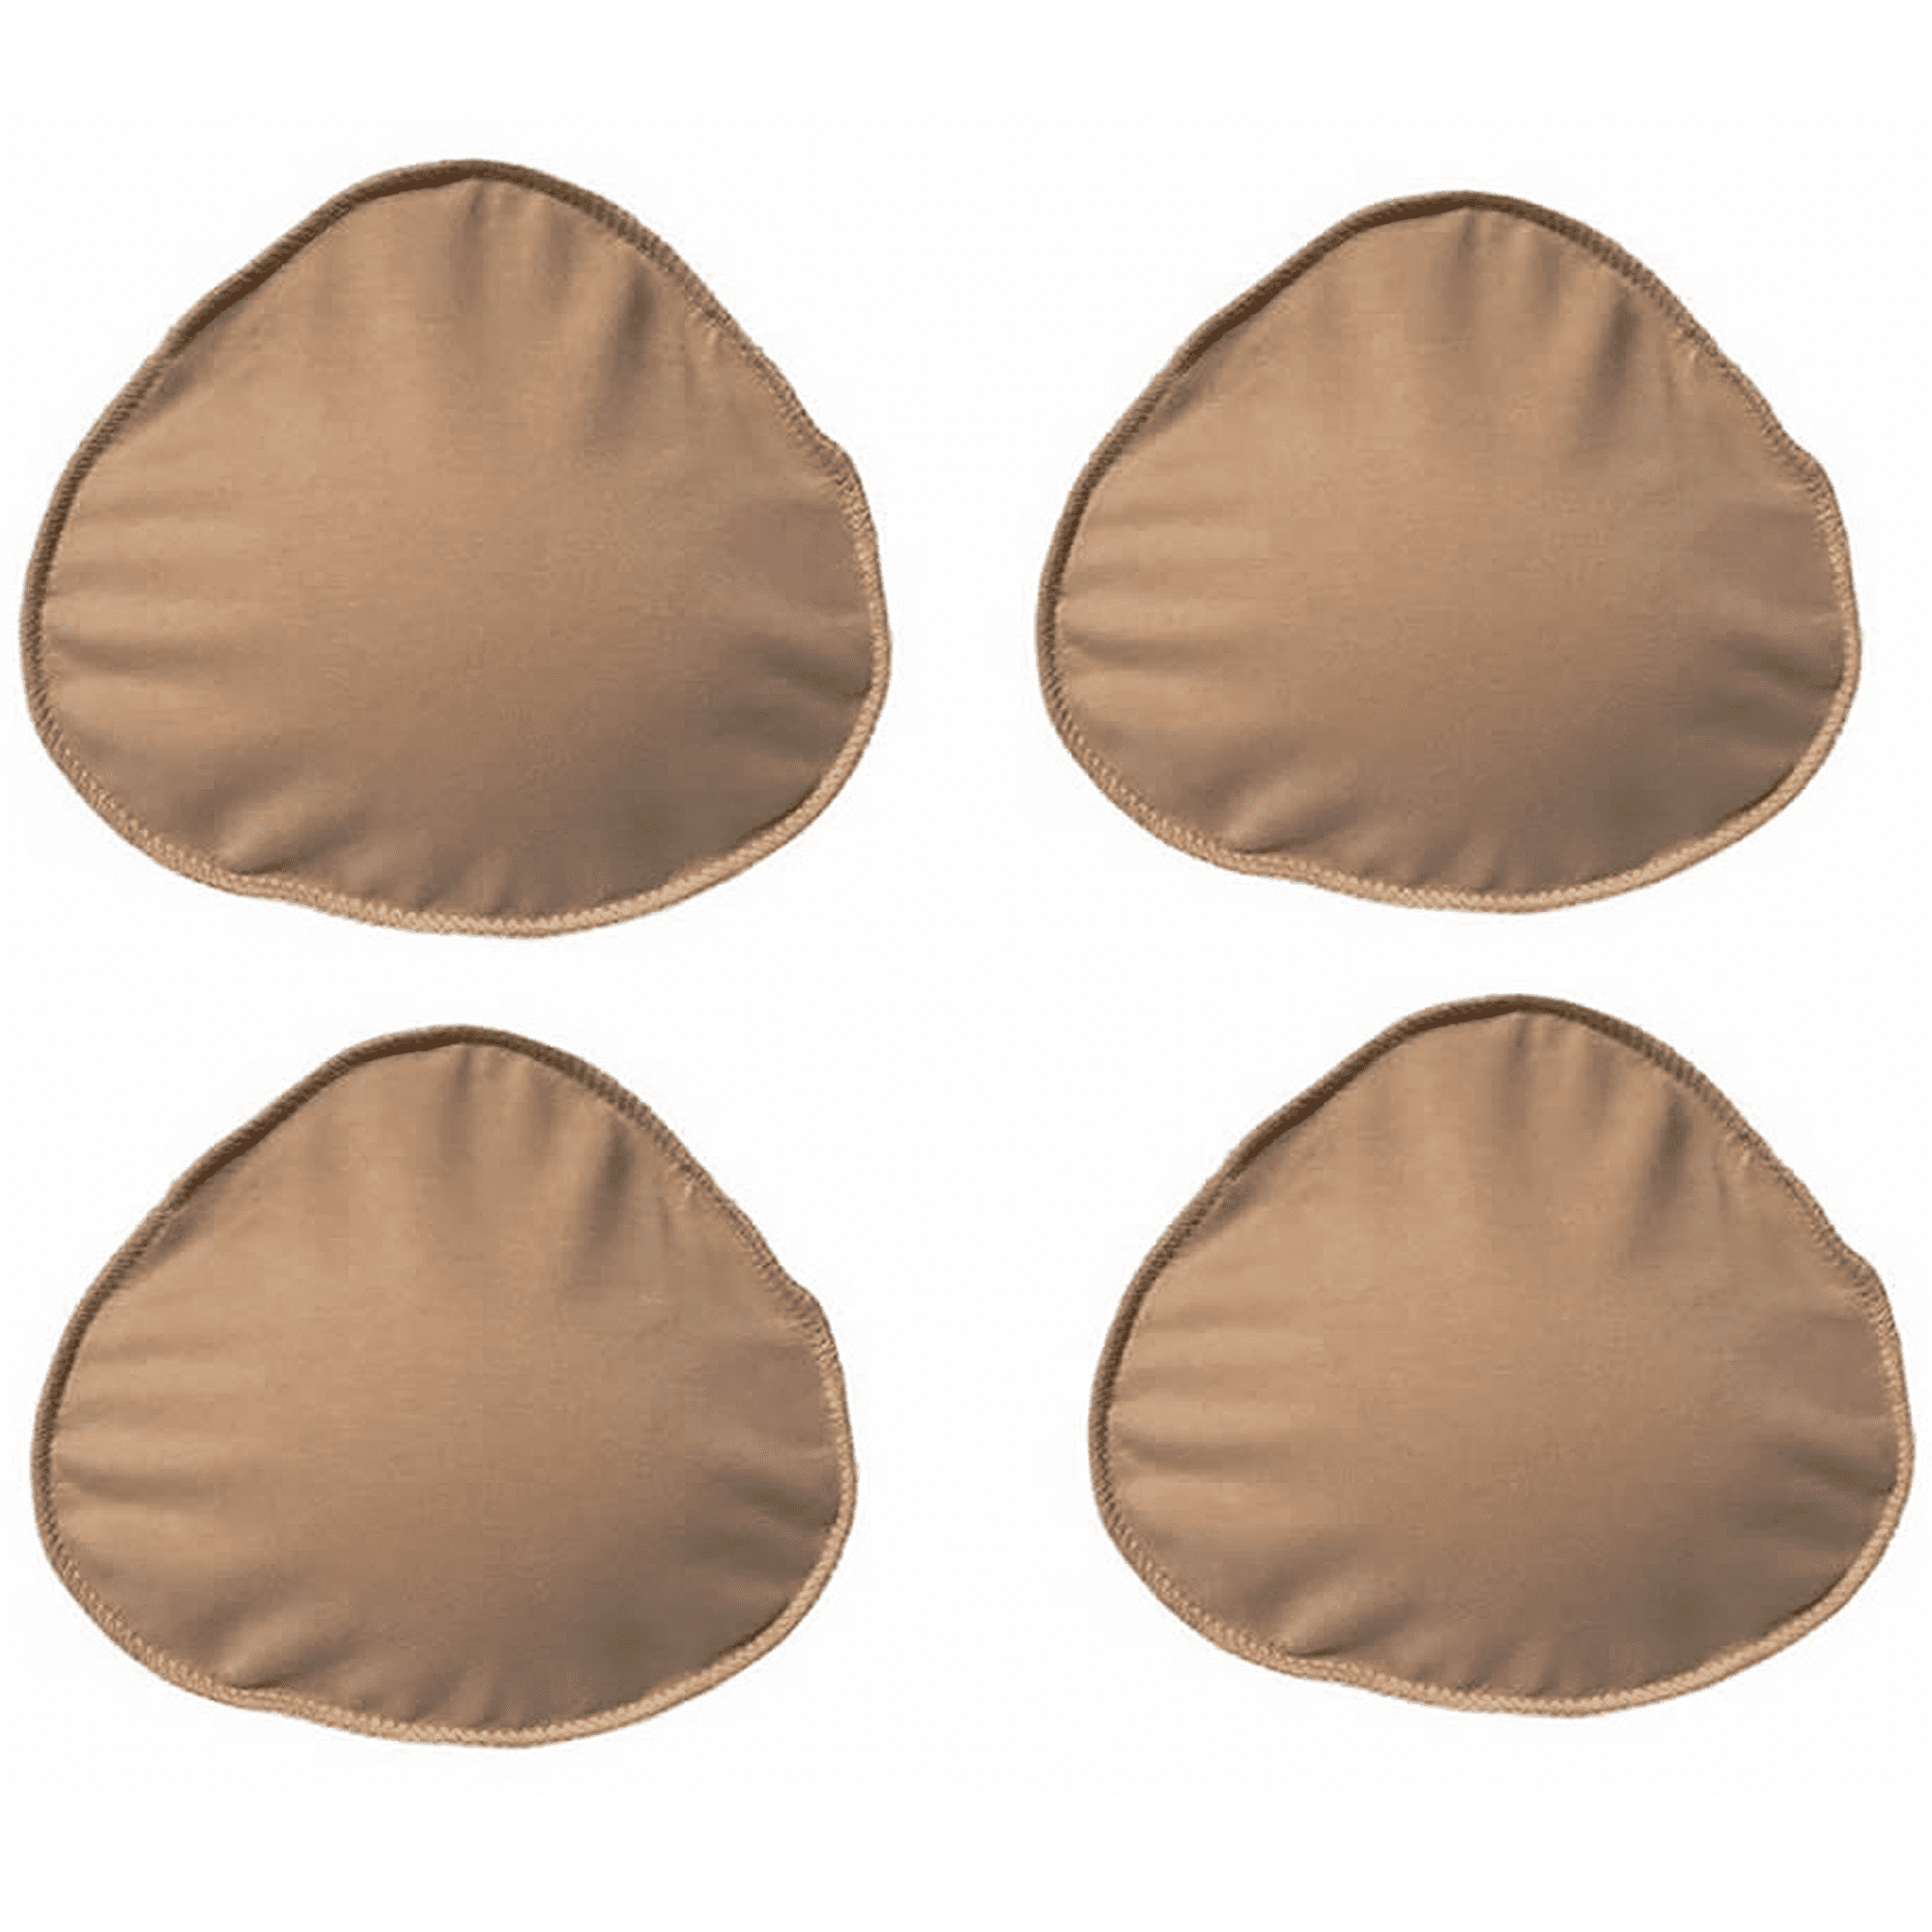 Feminique Silicone Breast Forms for Mastectomy, A Cup (500g) Nude